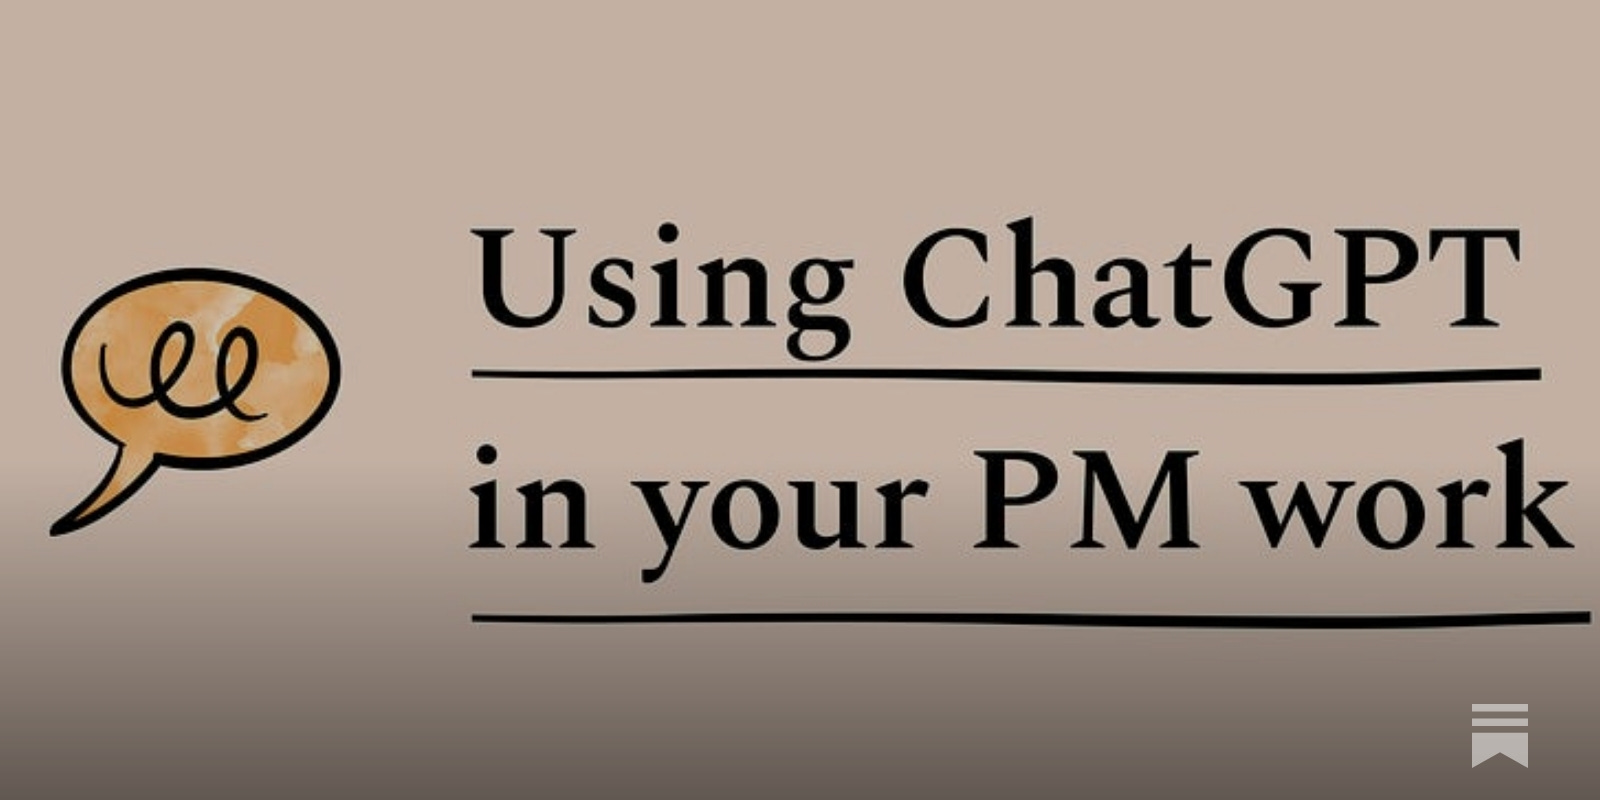 How to use ChatGPT in your PM work